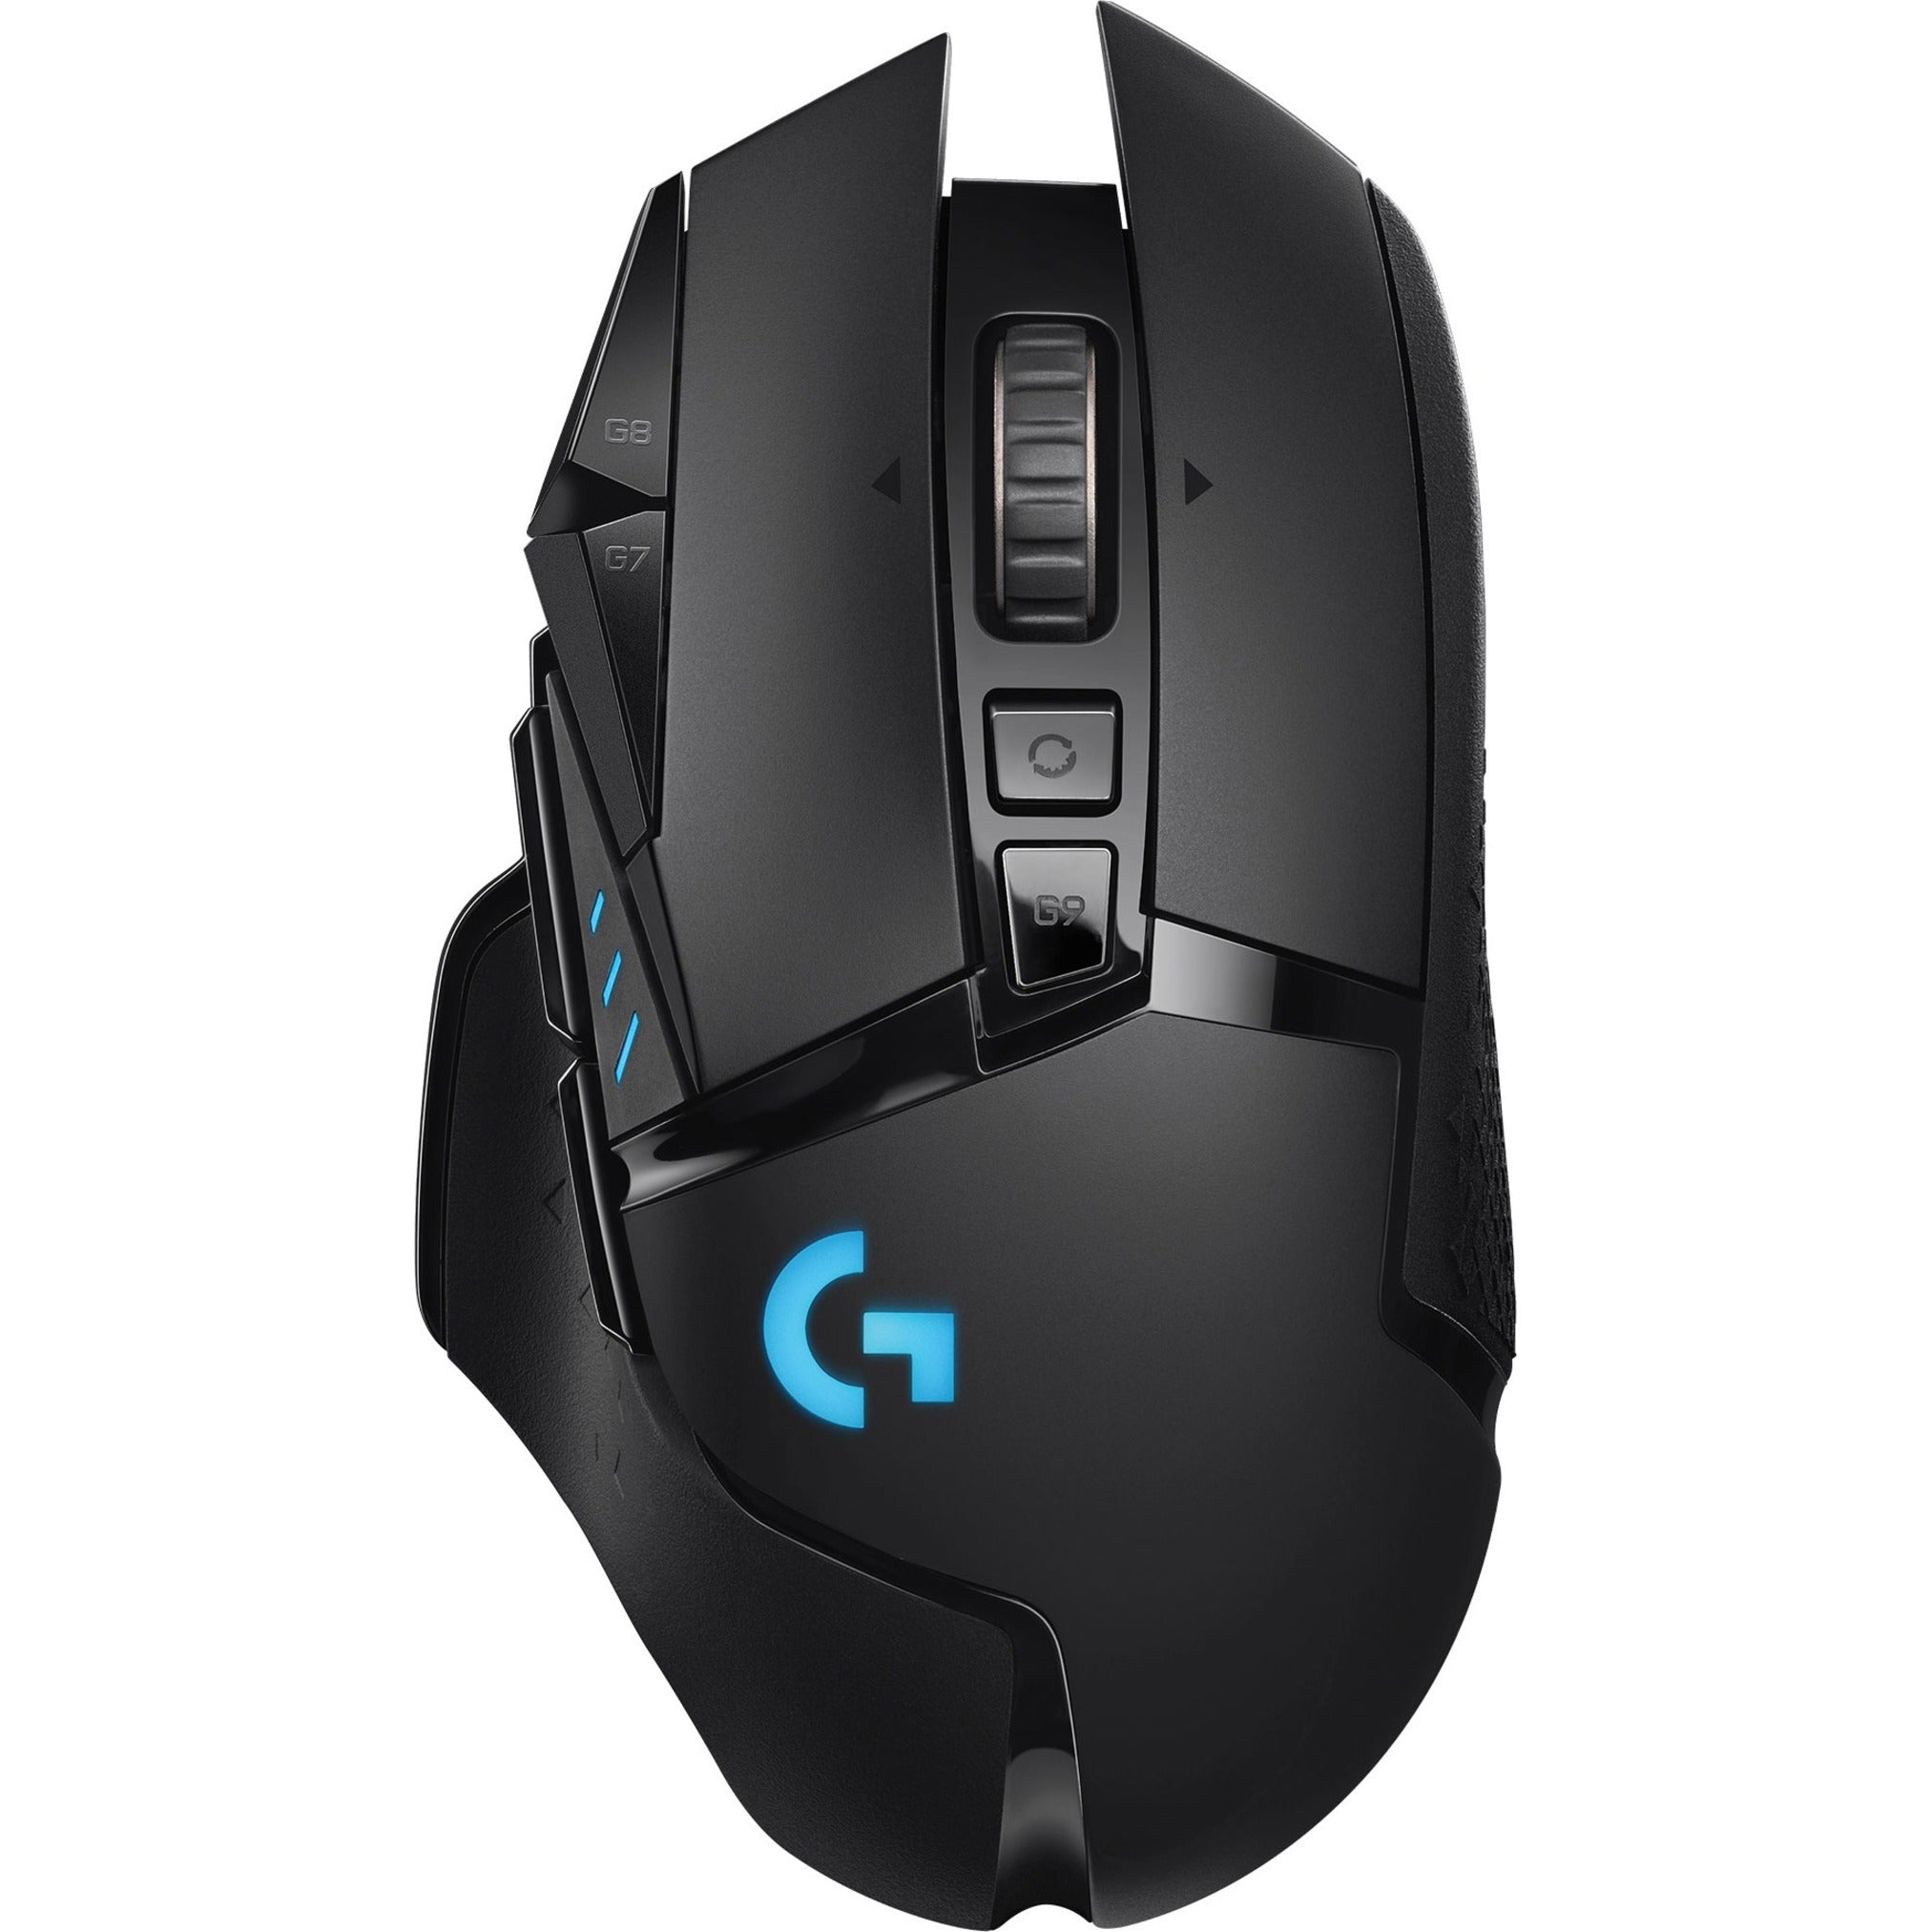 Logitech G502 X, G502 X Lightspeed and G502 X Plus Gaming Mice launched in  India